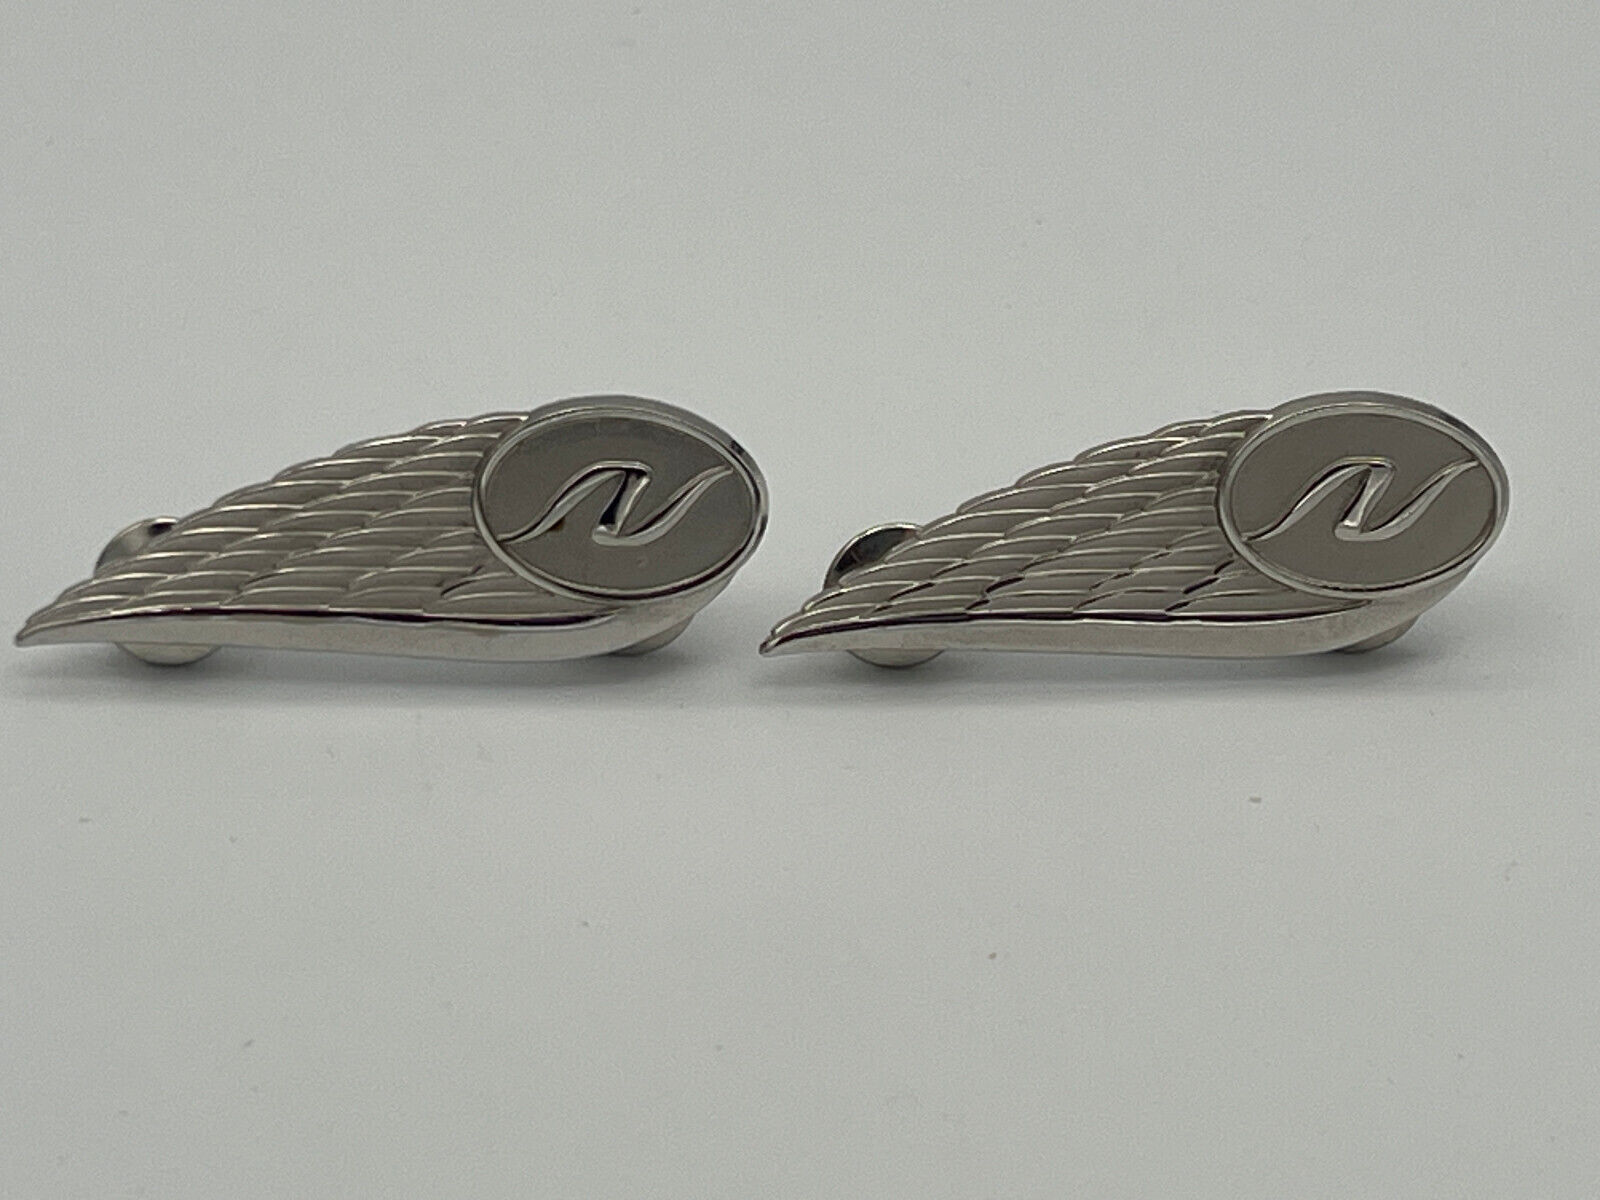 Vintage Lot of 2 National Airlines Flight Attendants Wing Pins/Badges